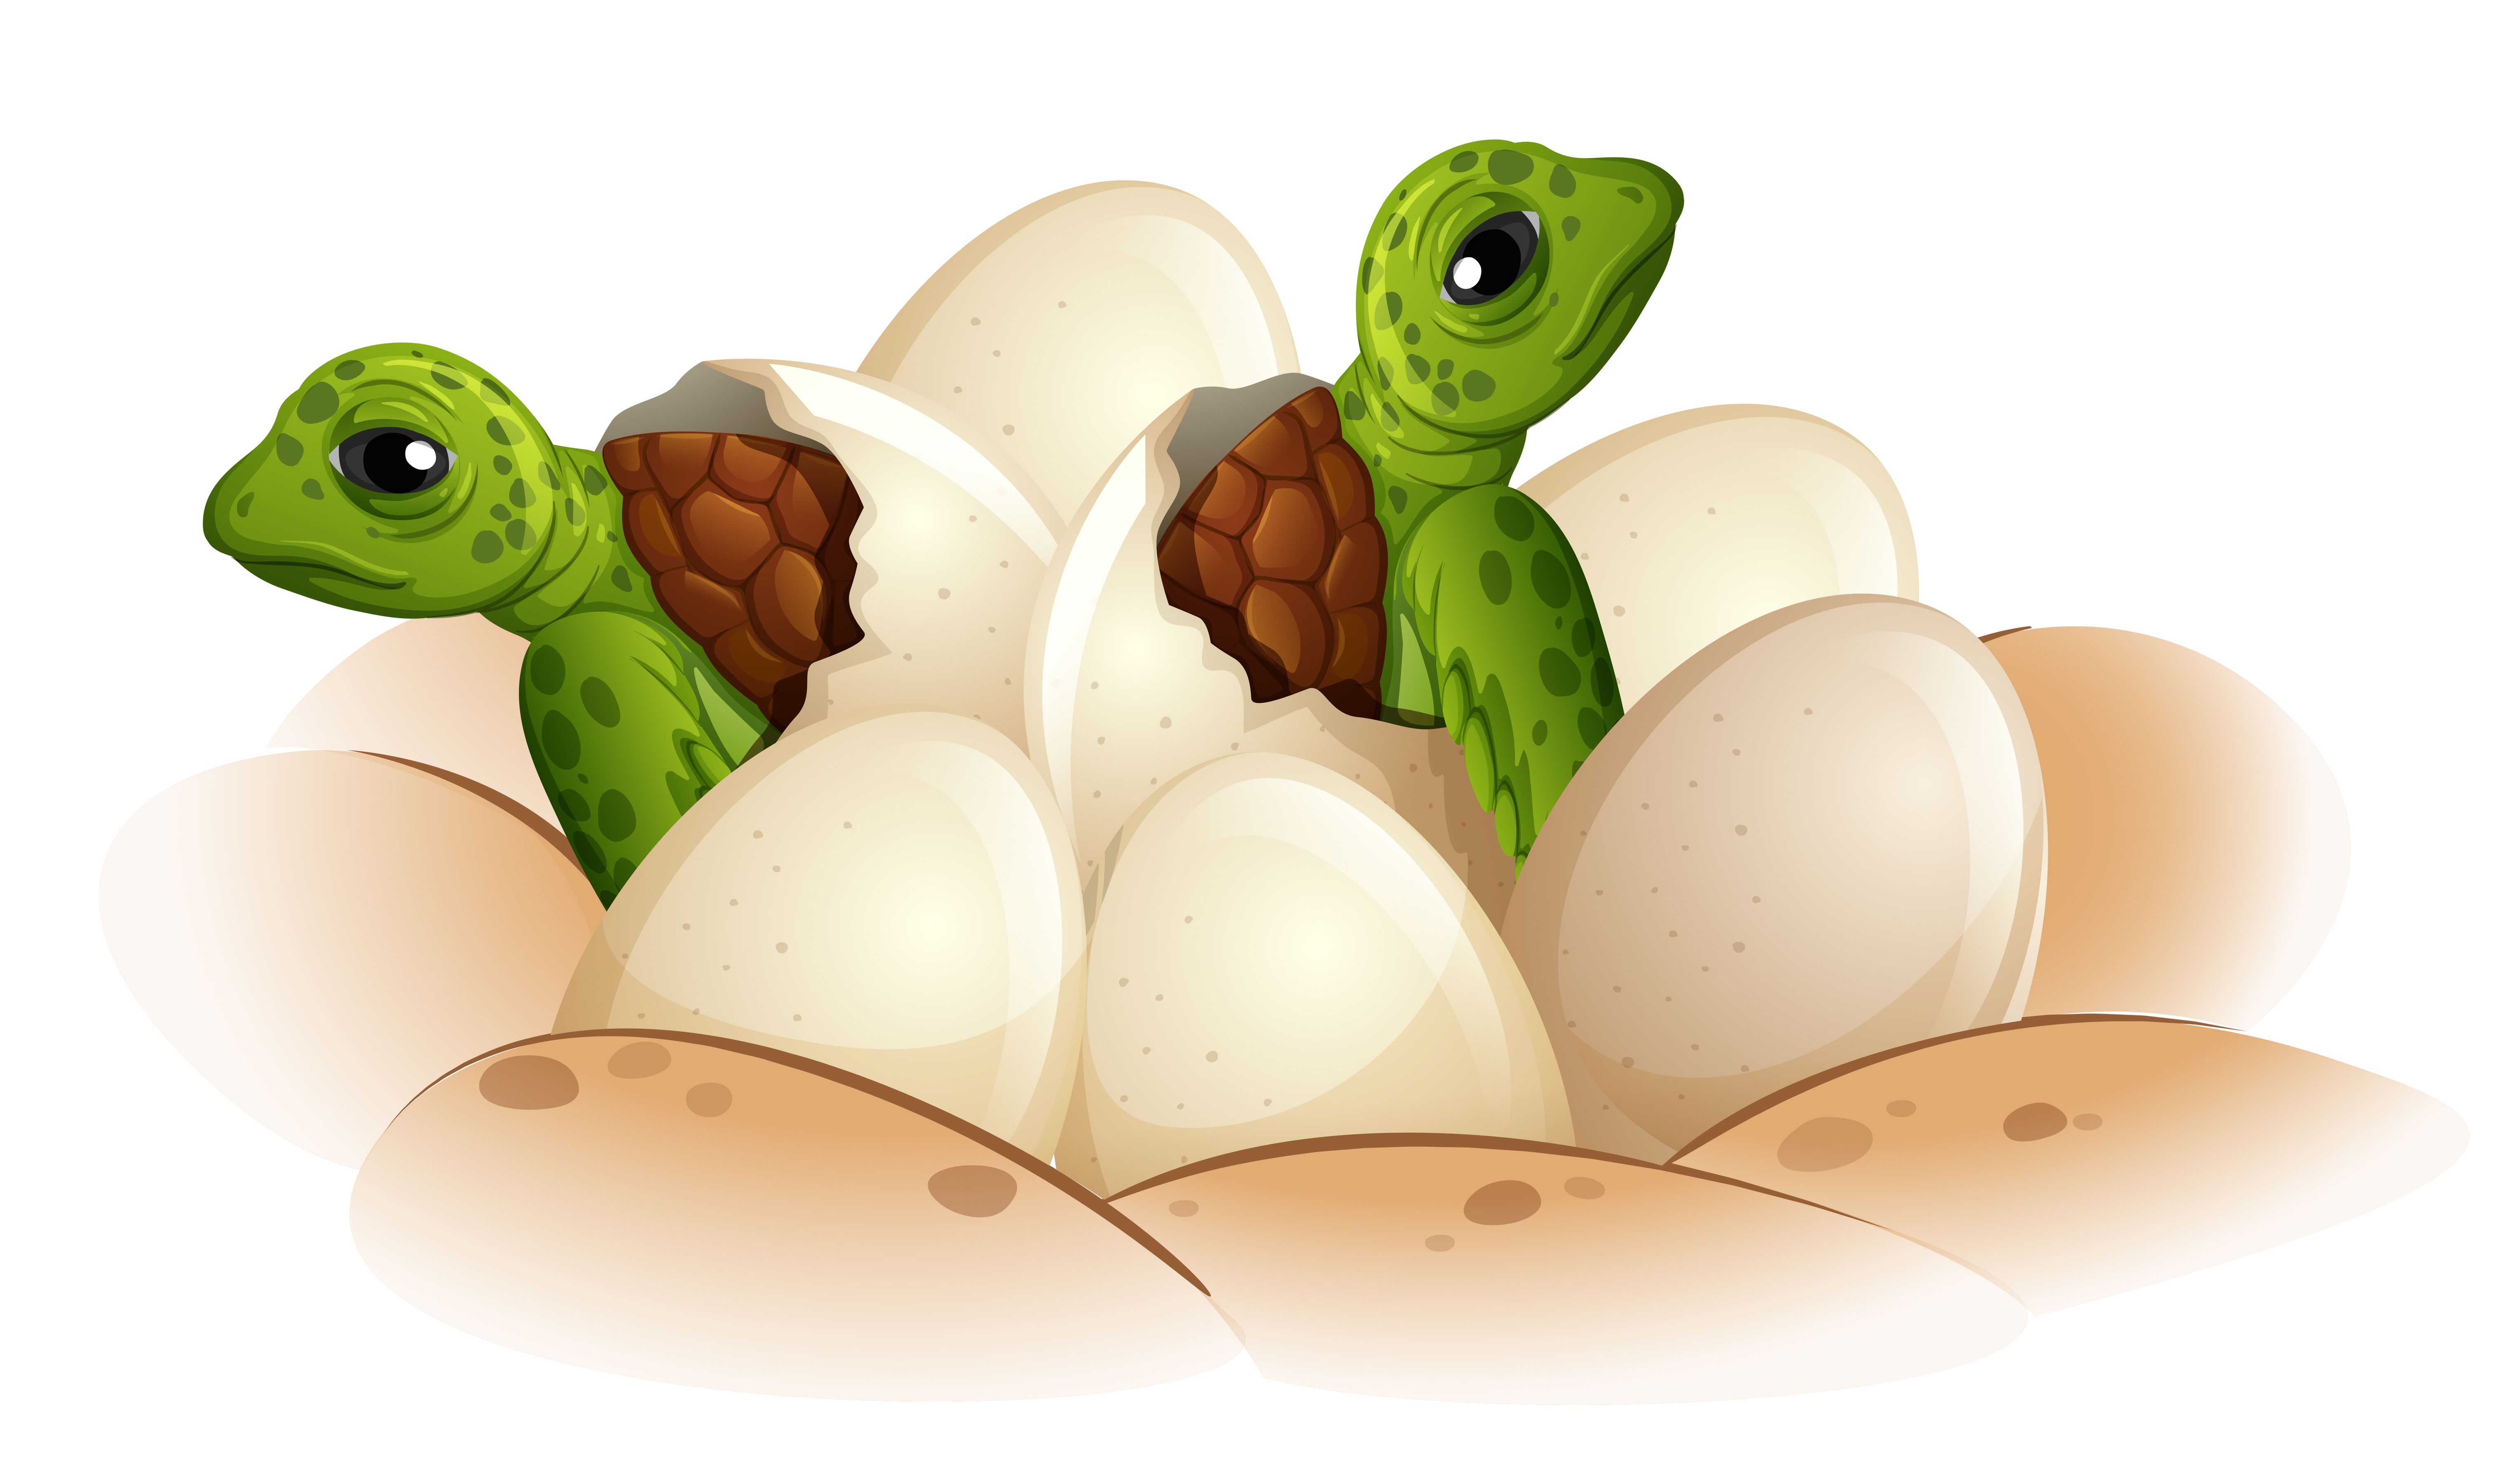 Turtle hatching the egg Free Vectors, Clipart Graphics